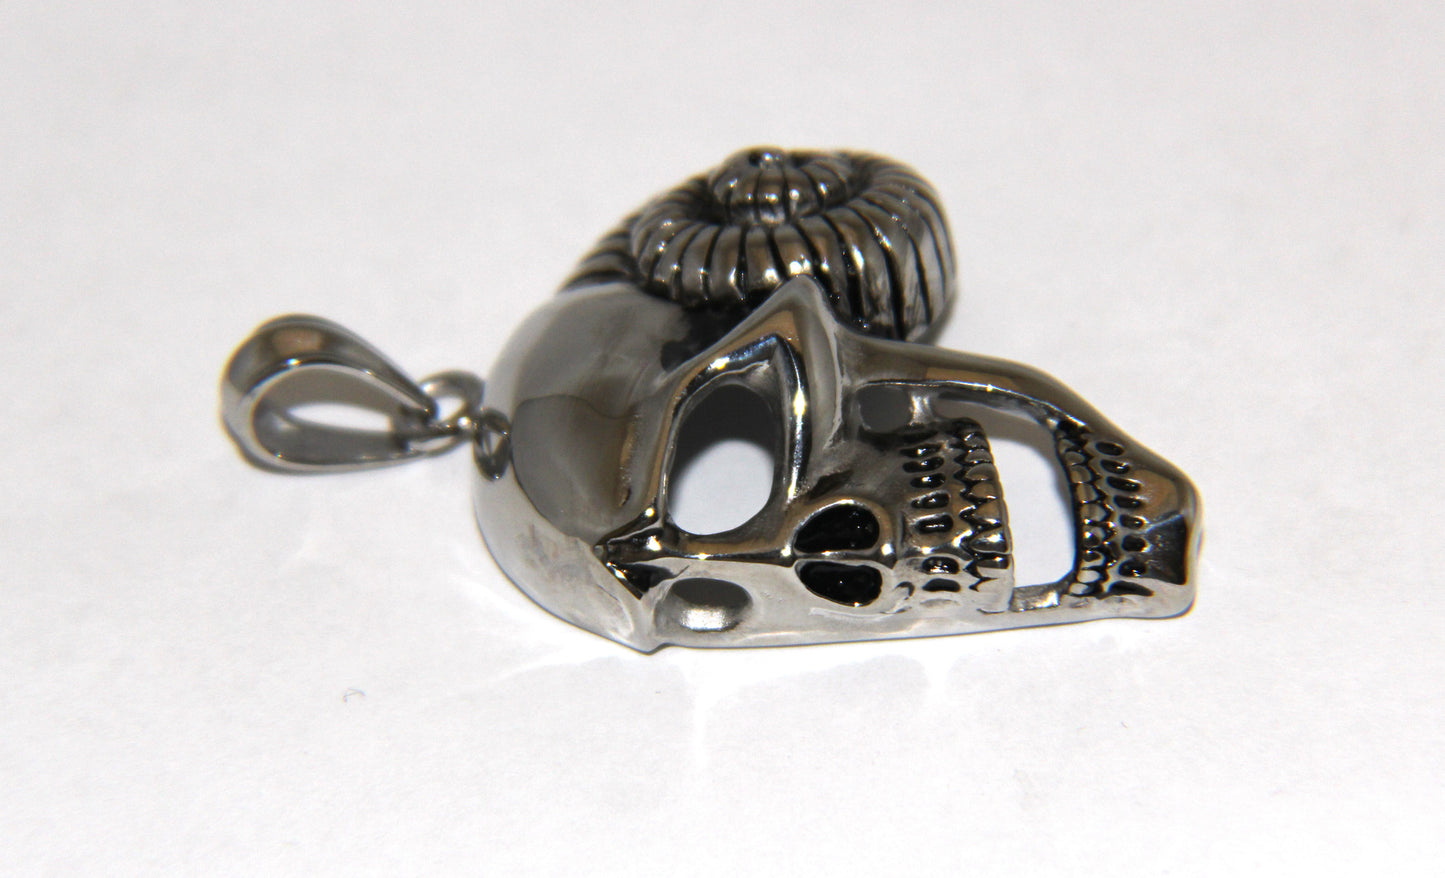 Stainless Steel Skull with Shell Pendant- UDINC0474